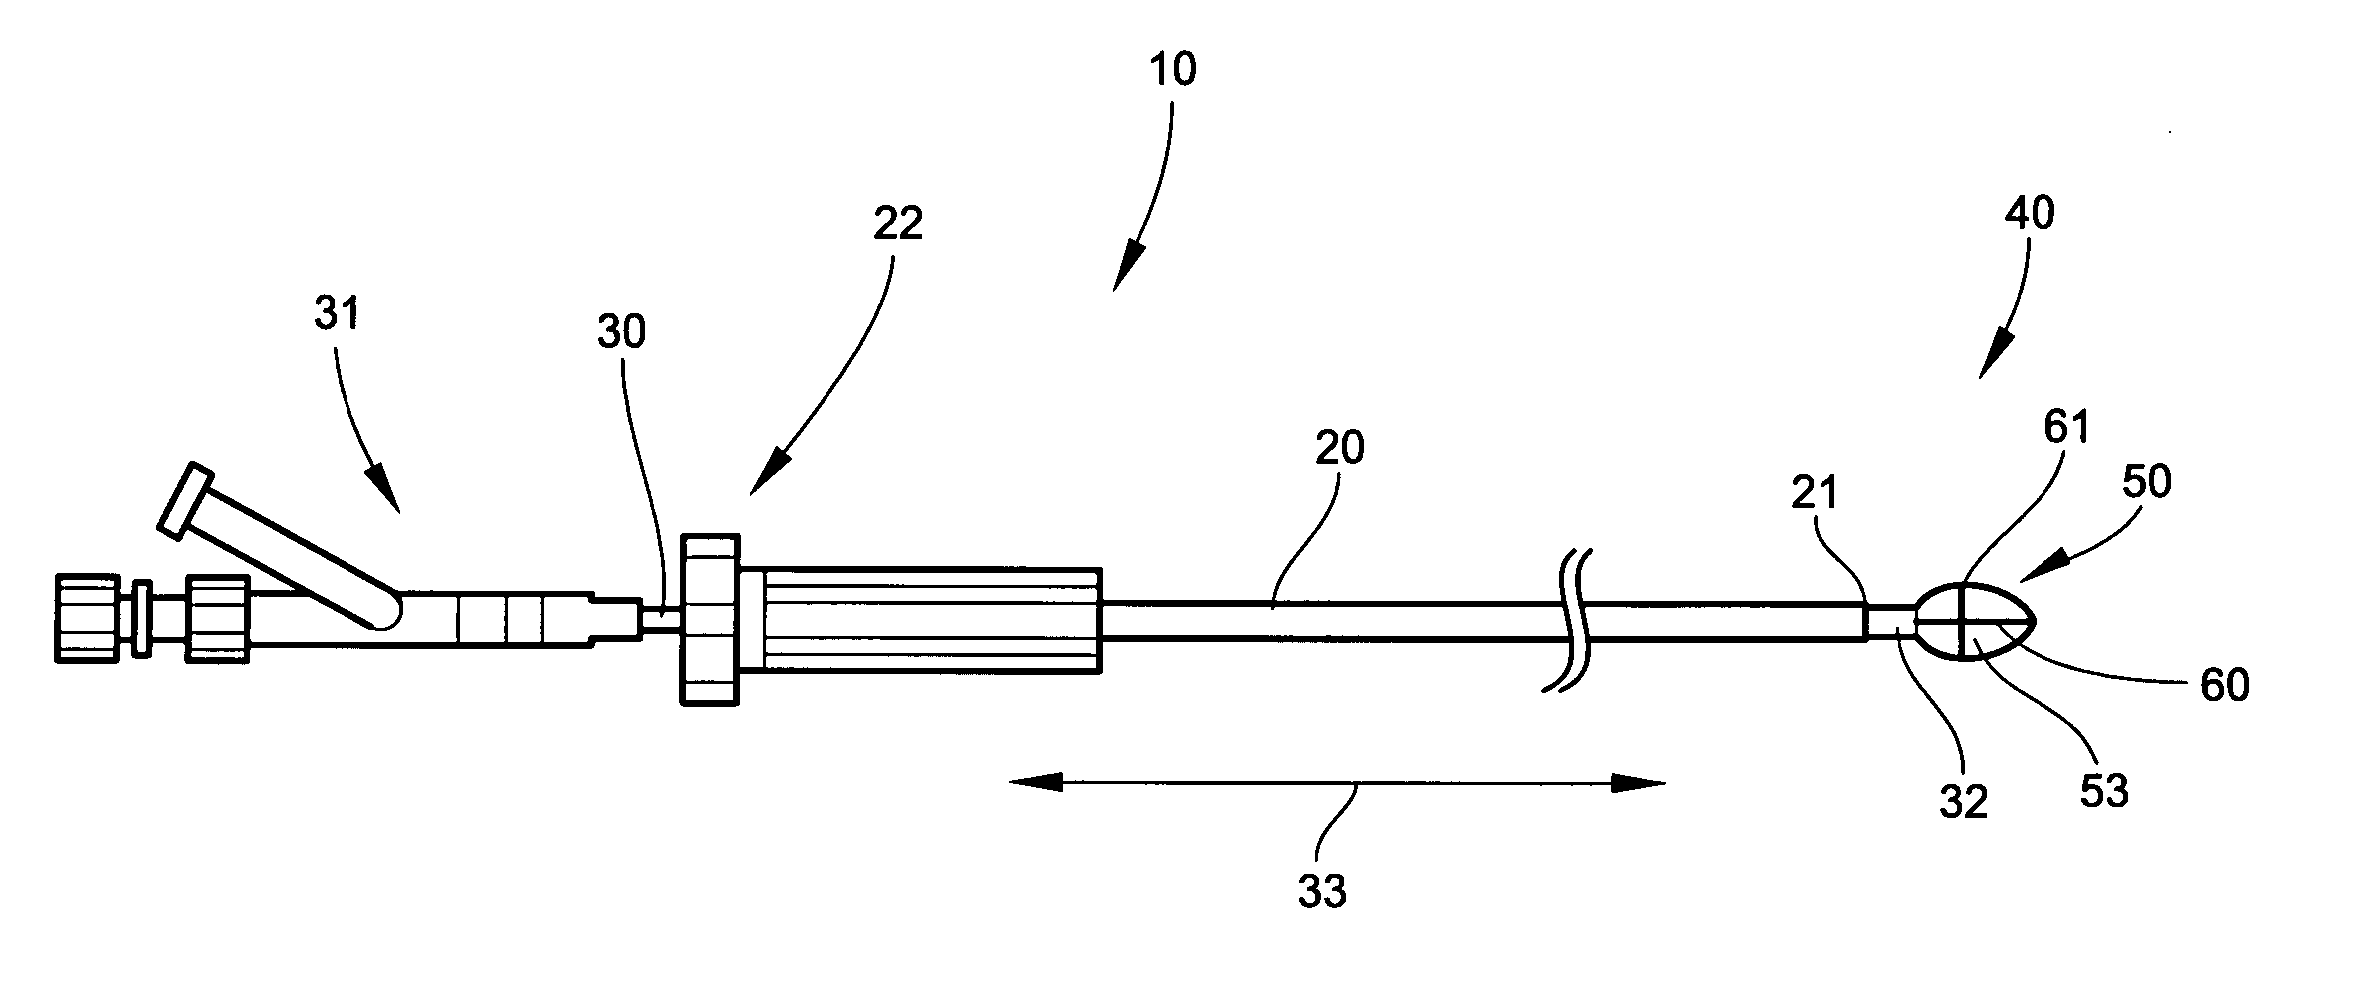 Radiopaque expandable body and methods